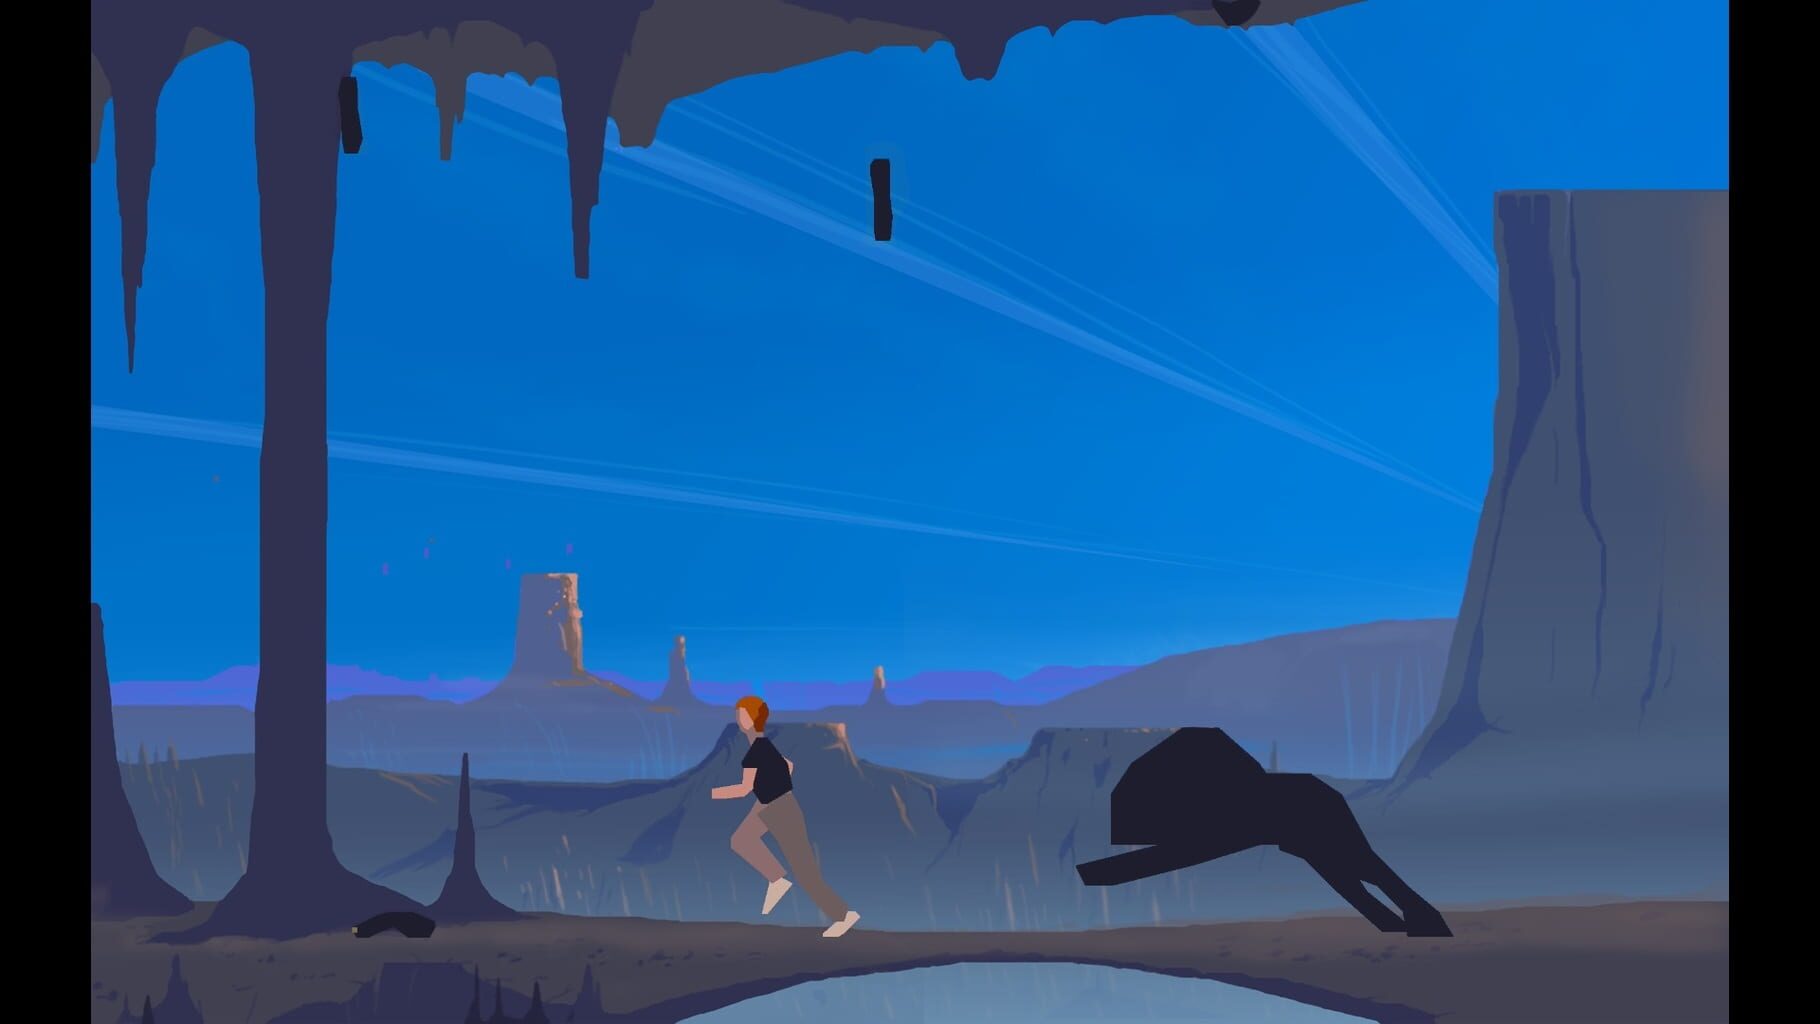 Another World: 20th Anniversary Edition screenshot